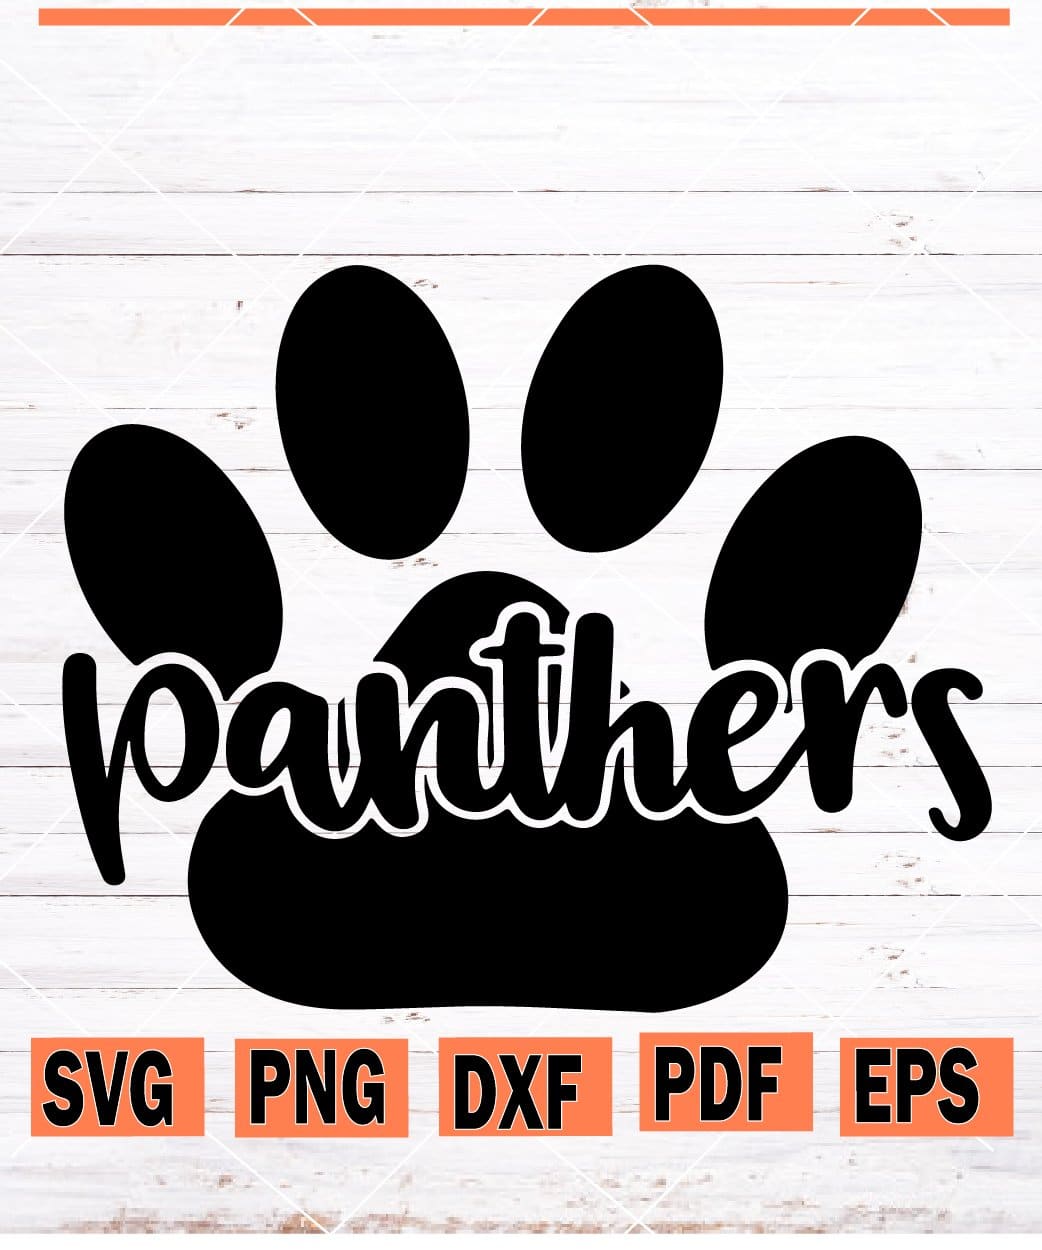 Download Panthers Paw Svg Panthers Paw Print Svg Panthers Svg Grunge Panthers Paw Svg Svg Hubs SVG, PNG, EPS, DXF File